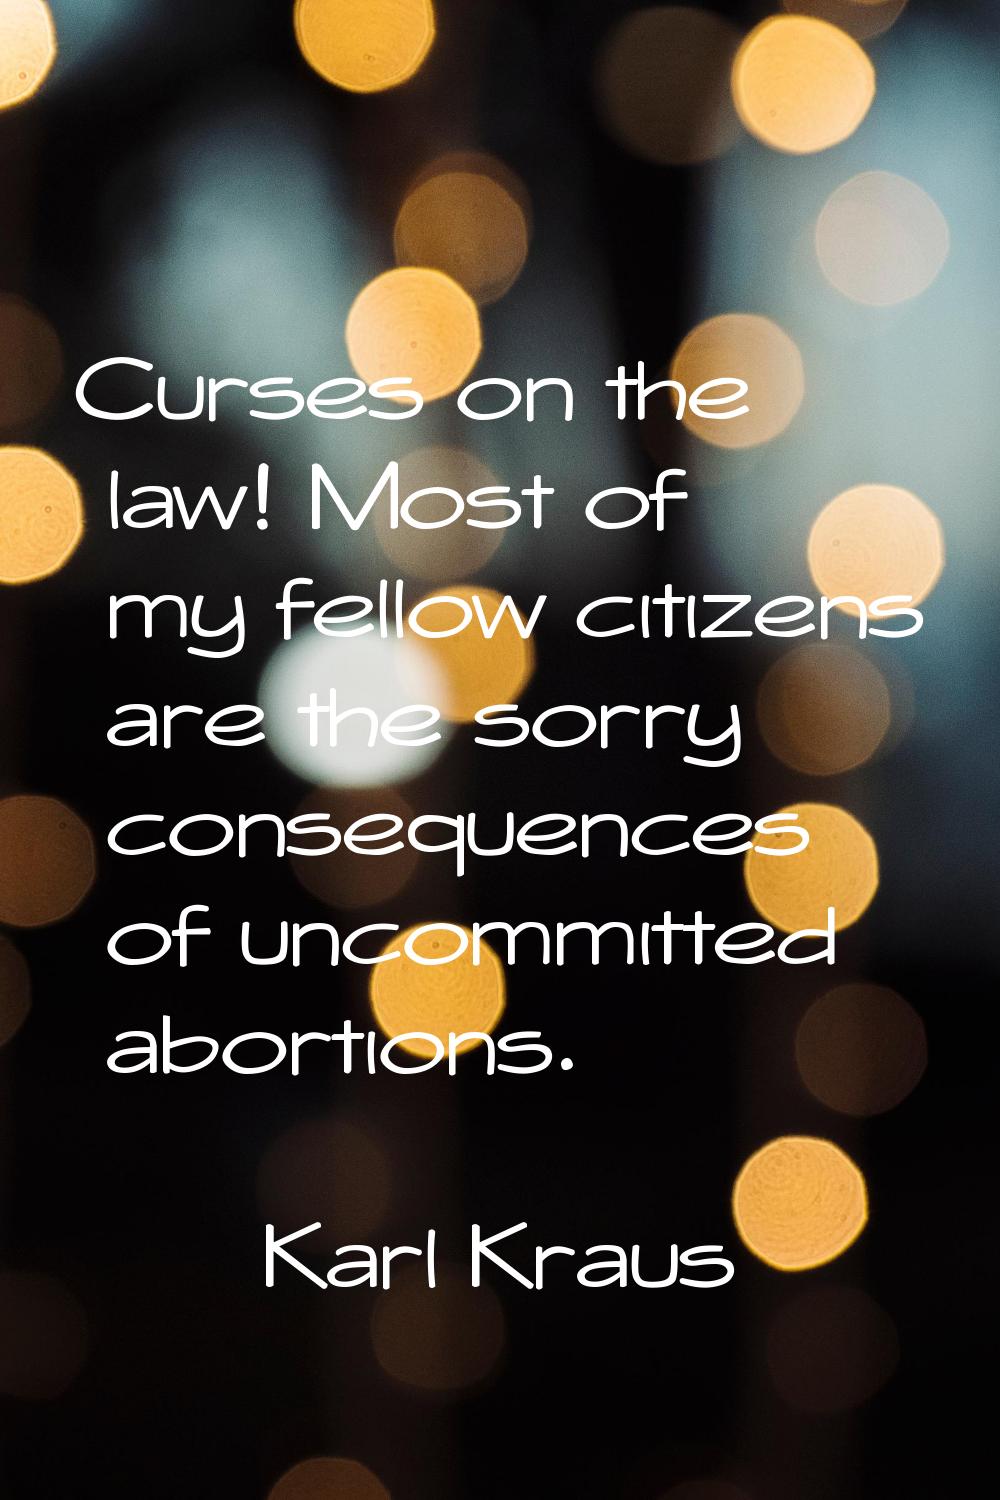 Curses on the law! Most of my fellow citizens are the sorry consequences of uncommitted abortions.